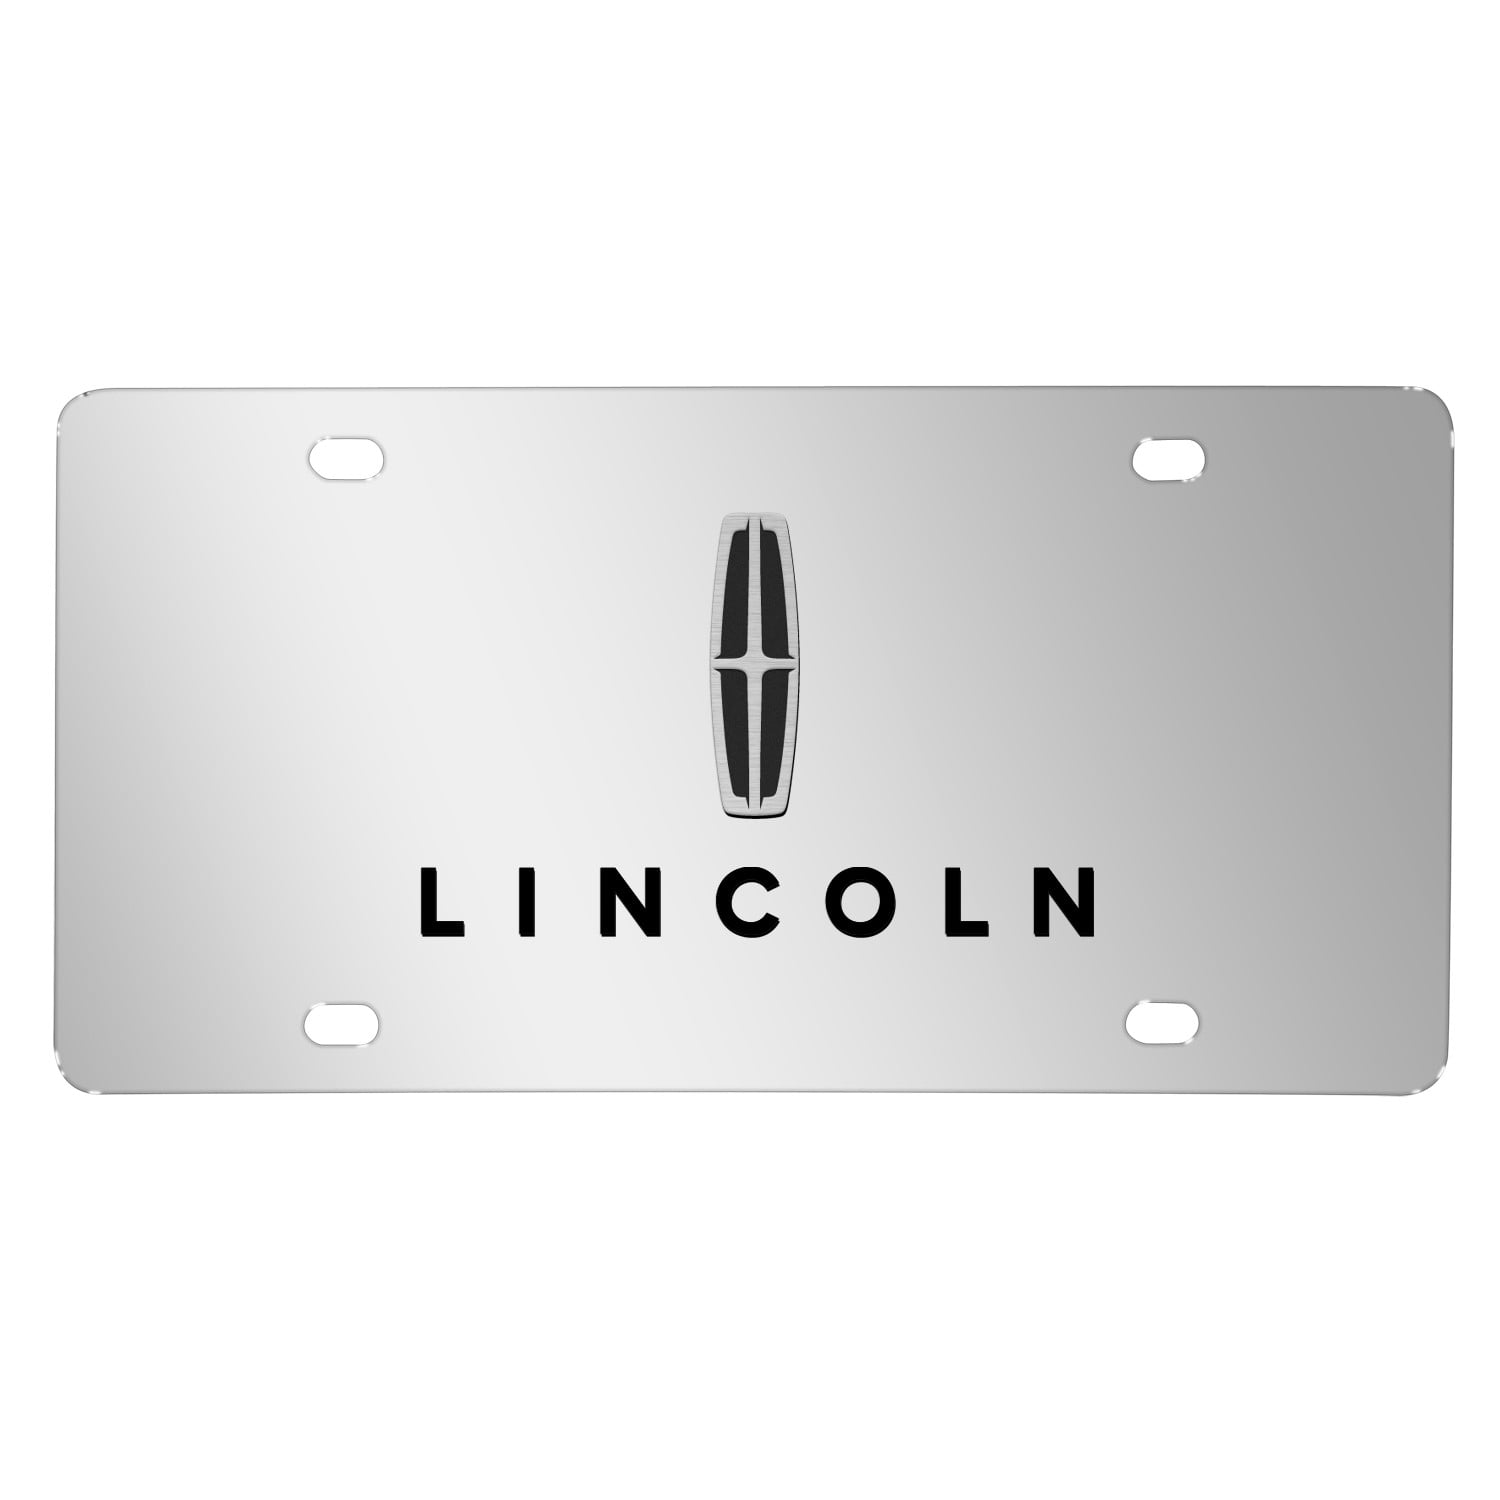 Lincoln 3D Dual Logo Mirror Chrome Stainless Steel License Plate ...